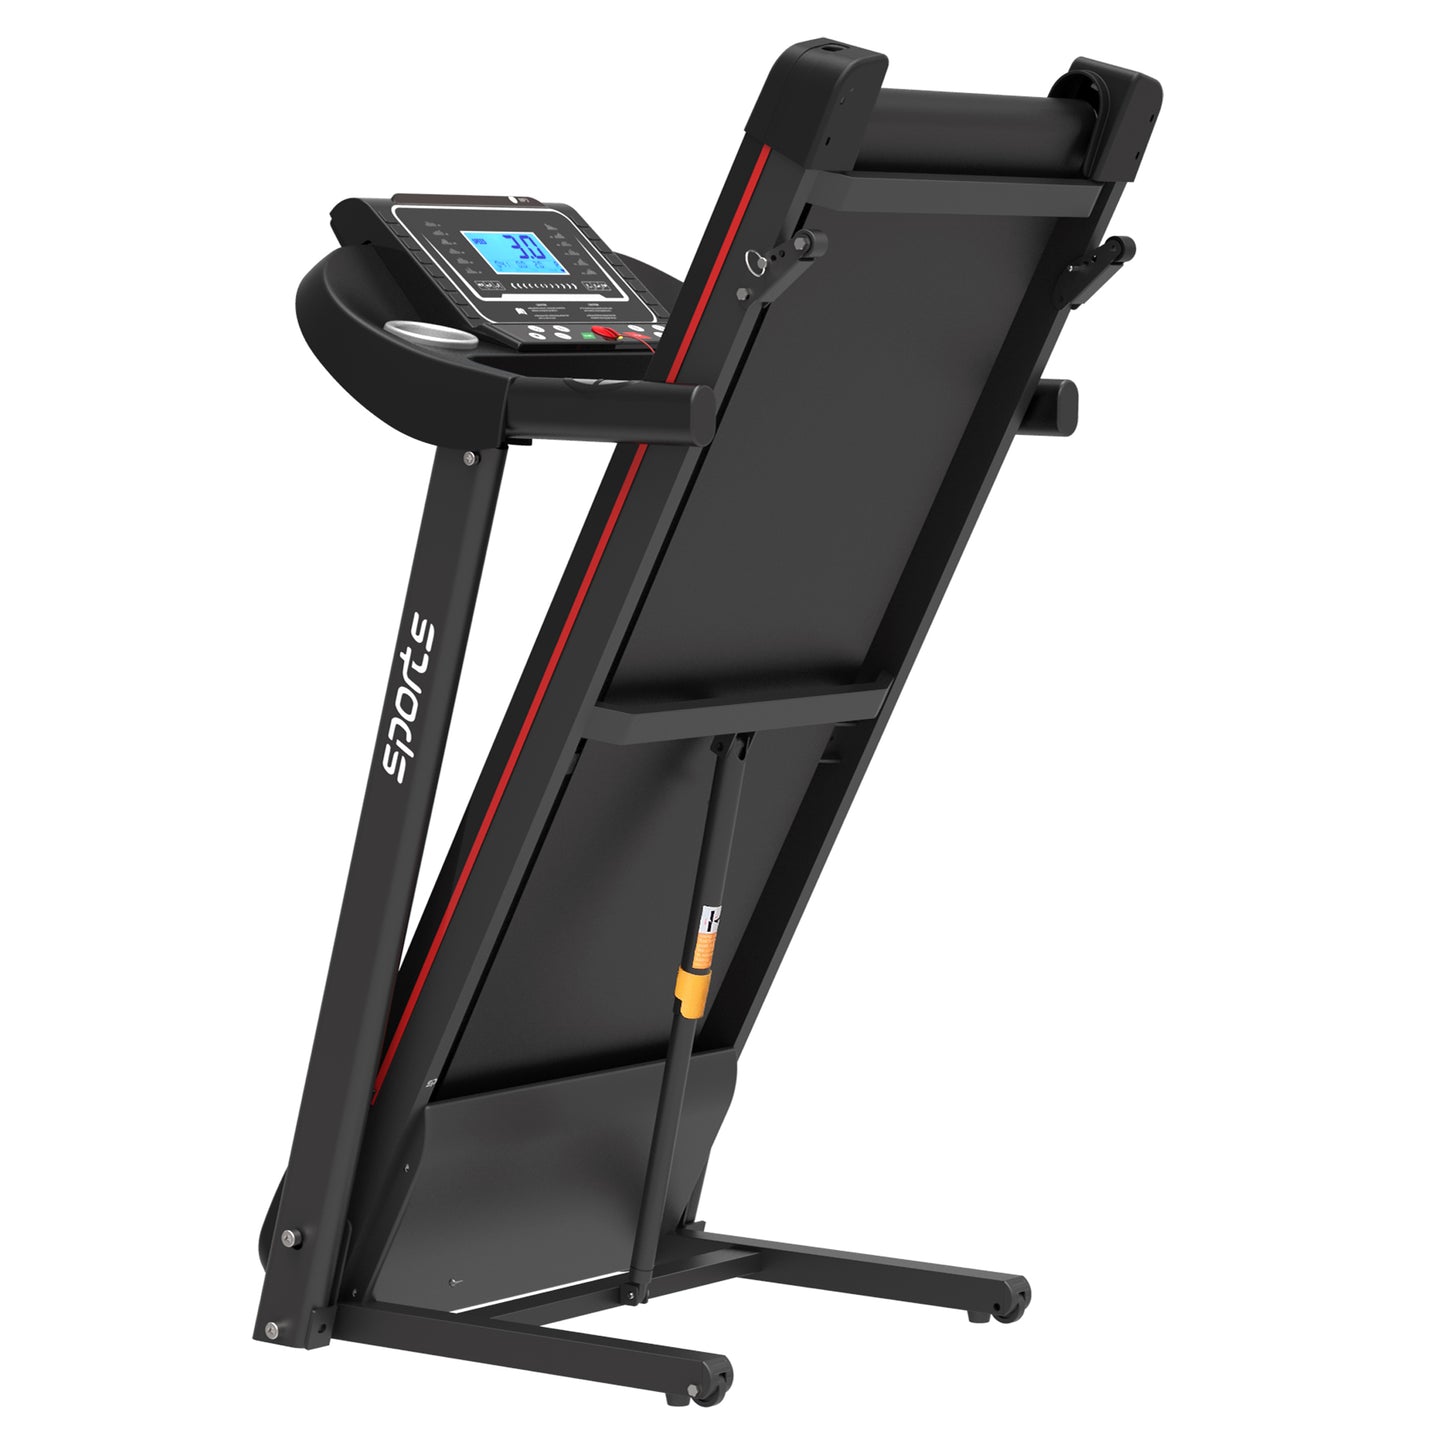 Folding Treadmill, Smart Motorized Treadmill with Manual Incline and Air Spring  MP3, Exercise Running Machine with 5& LCD Display for Home Use